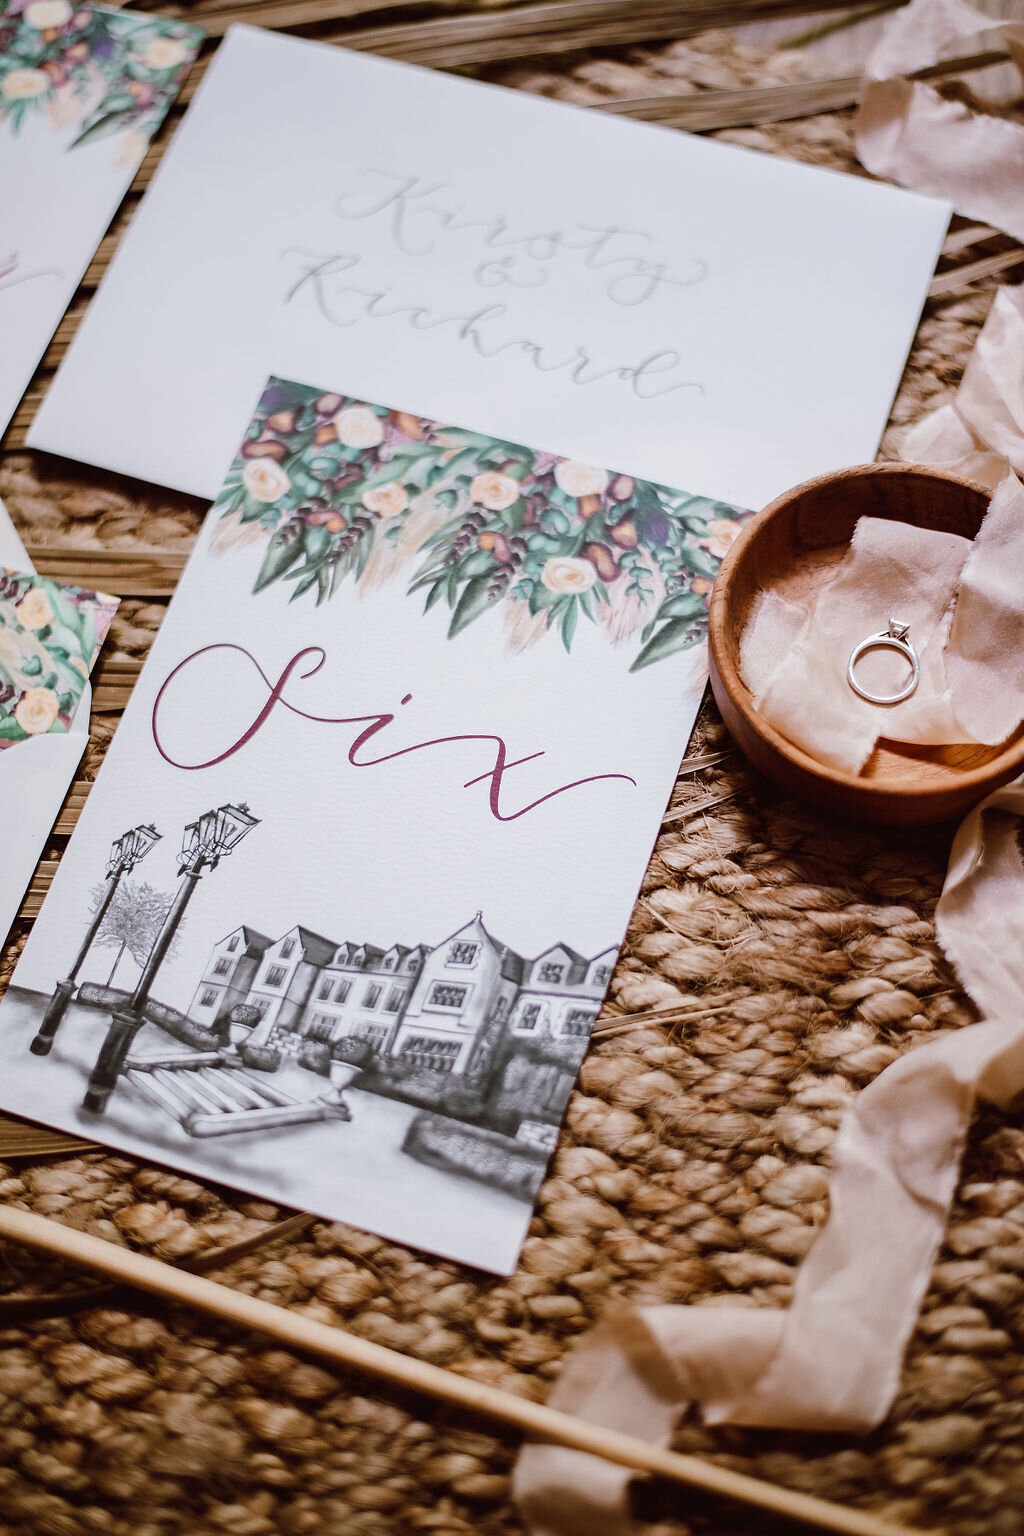 South Lodge hotel boho wedding Table number with venue illustration, calligraphy and painted florals, pampass grass, thistles and roses..jpg